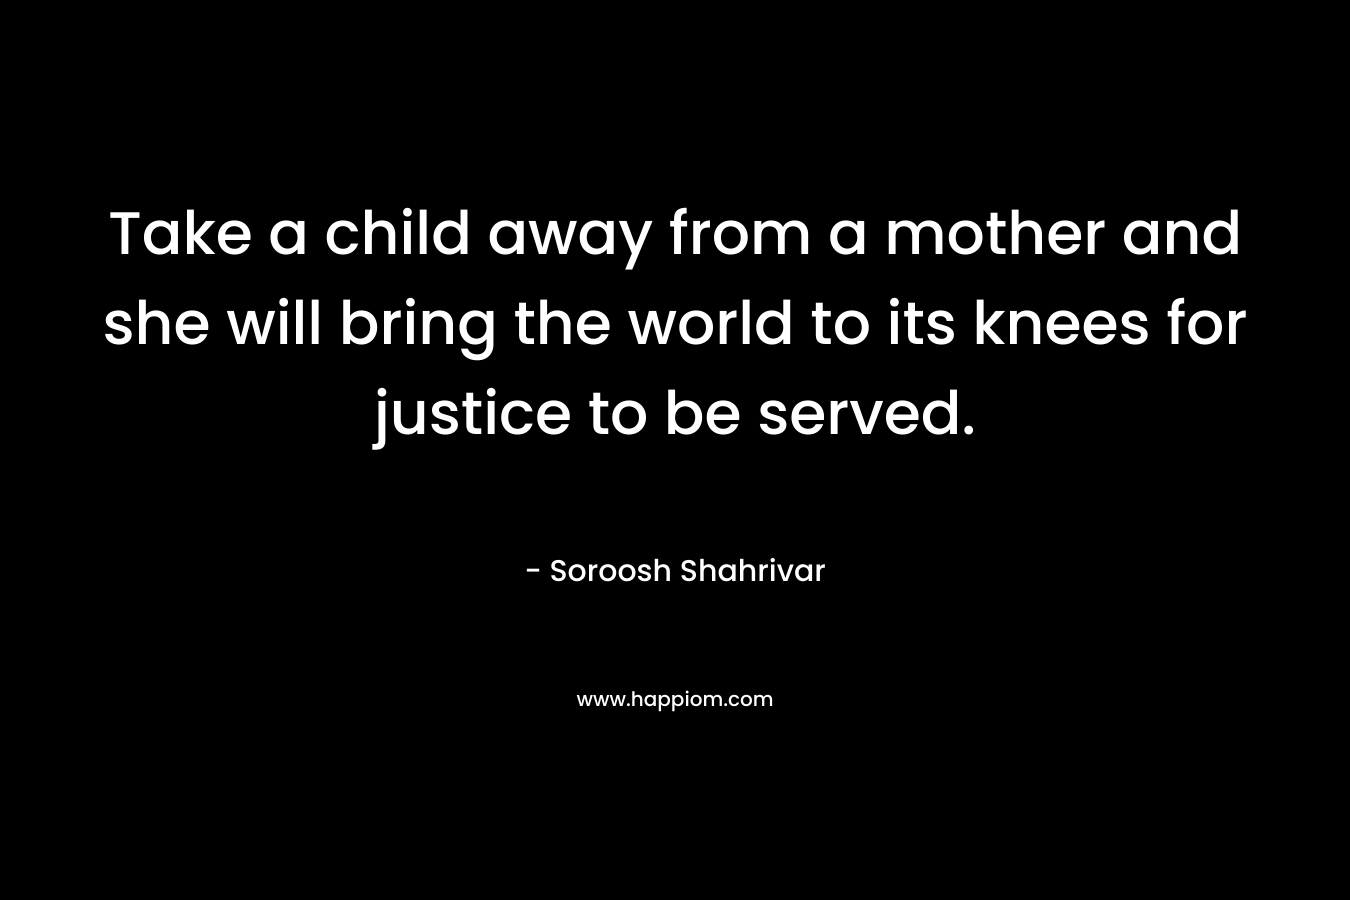 Take a child away from a mother and she will bring the world to its knees for justice to be served. – Soroosh Shahrivar